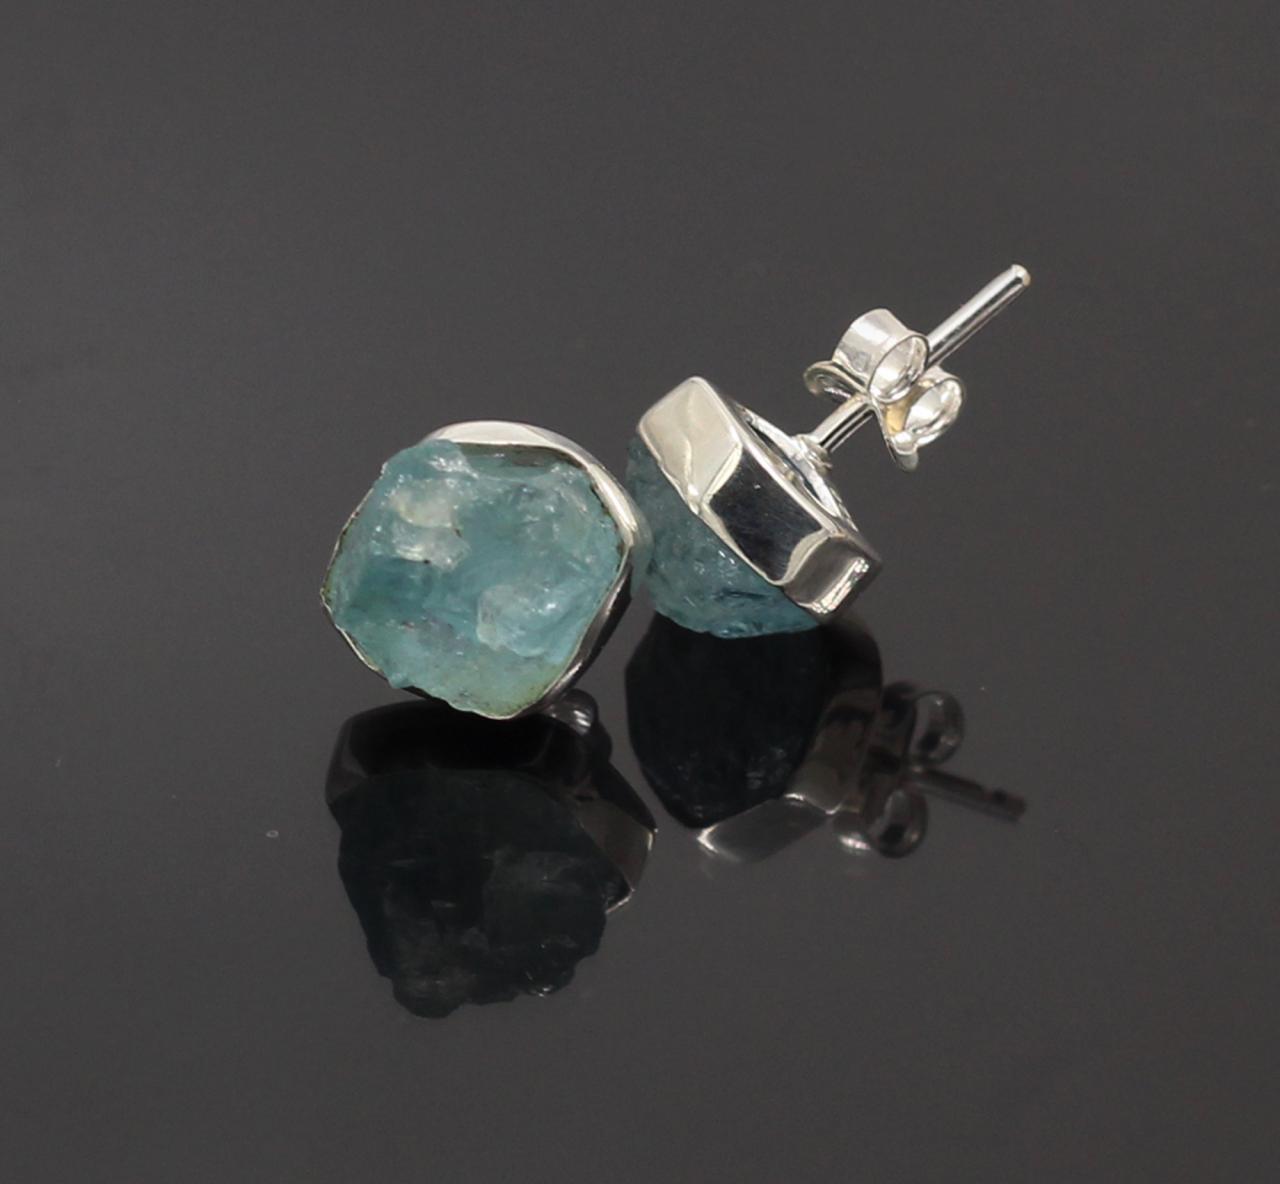 Amazing Aquamarine Stud Post Earring,solid 925 Sterling Silver Jewelry,daughter's Birthday Gift,healing Rough Aquamarine Earring Just